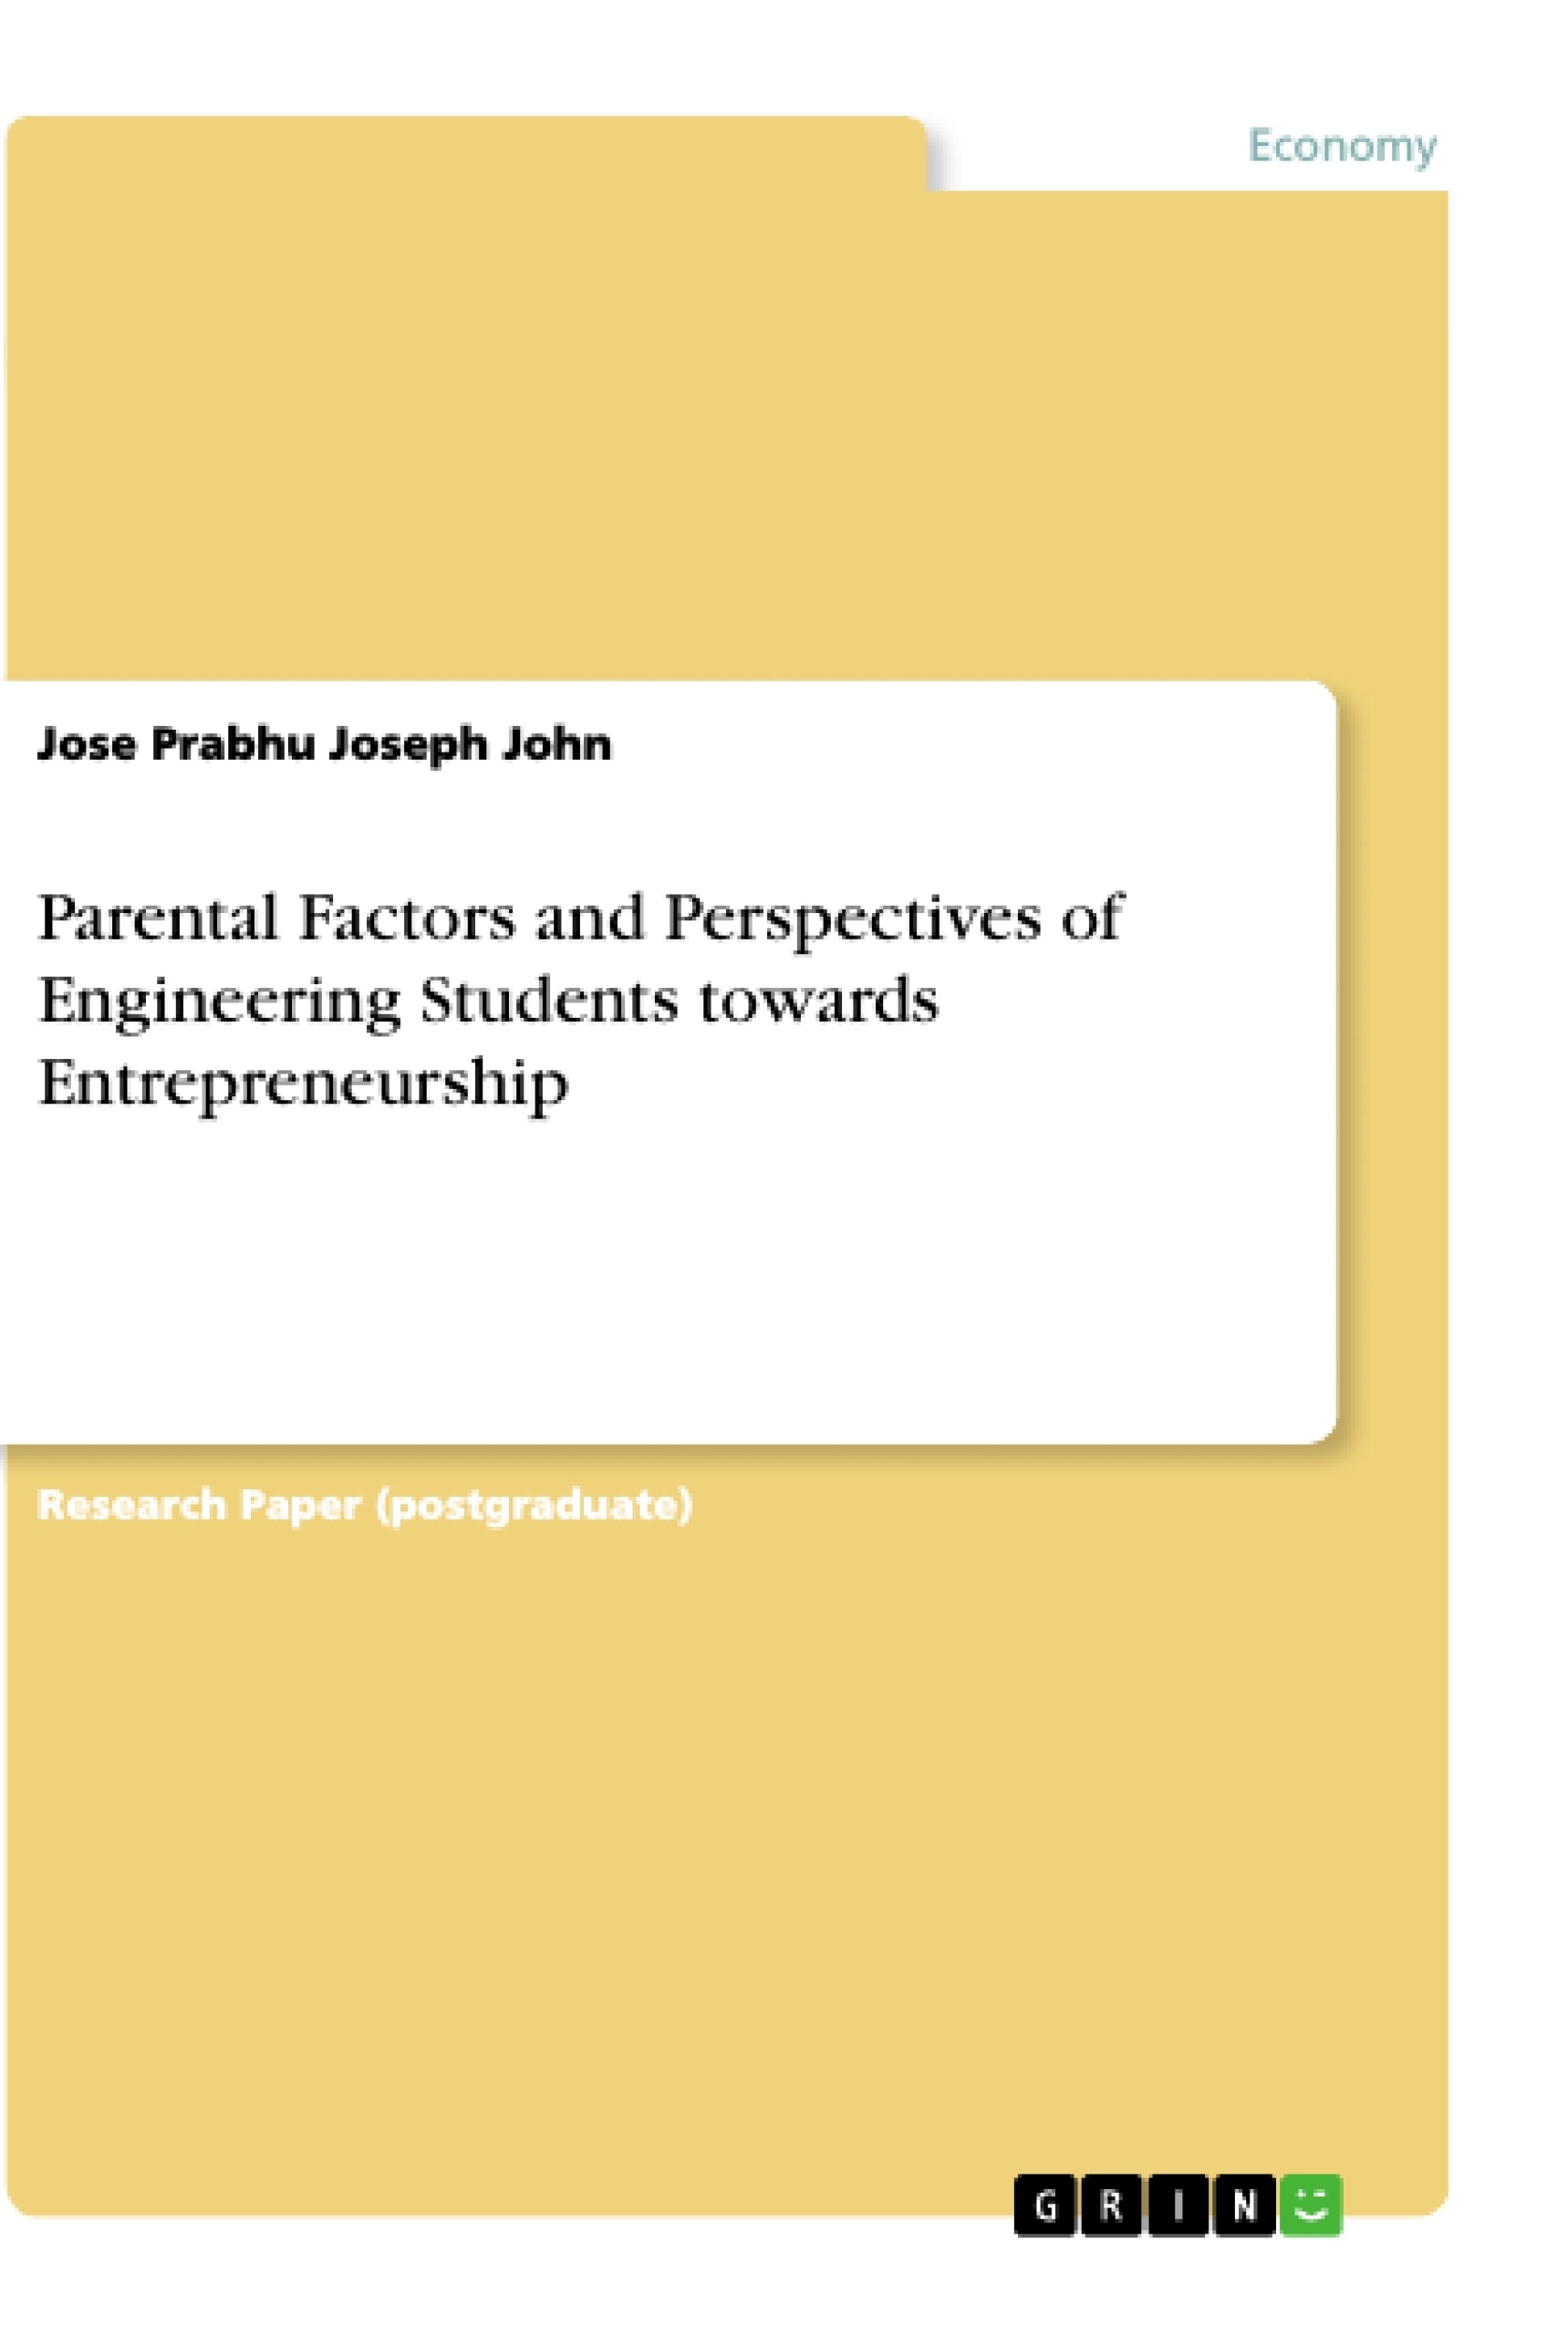 Titre: Parental Factors and Perspectives of Engineering Students towards Entrepreneurship